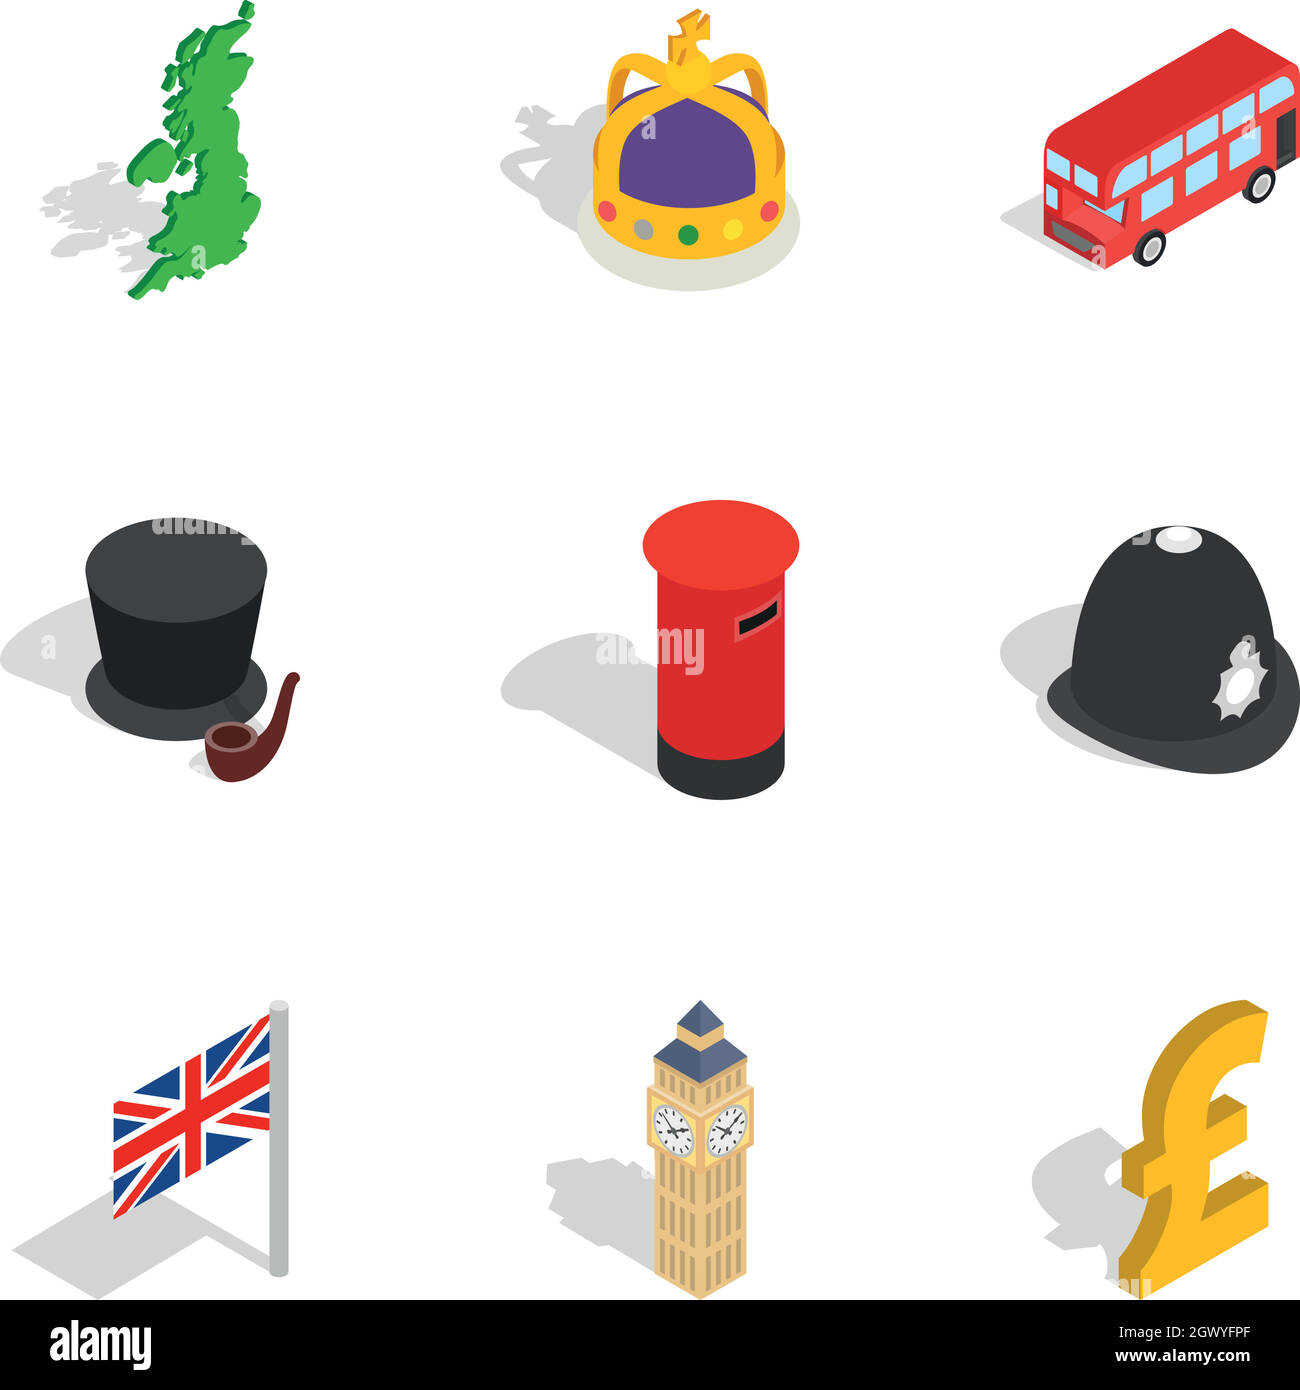 London city elements icons, isometric 3d style Stock Vector